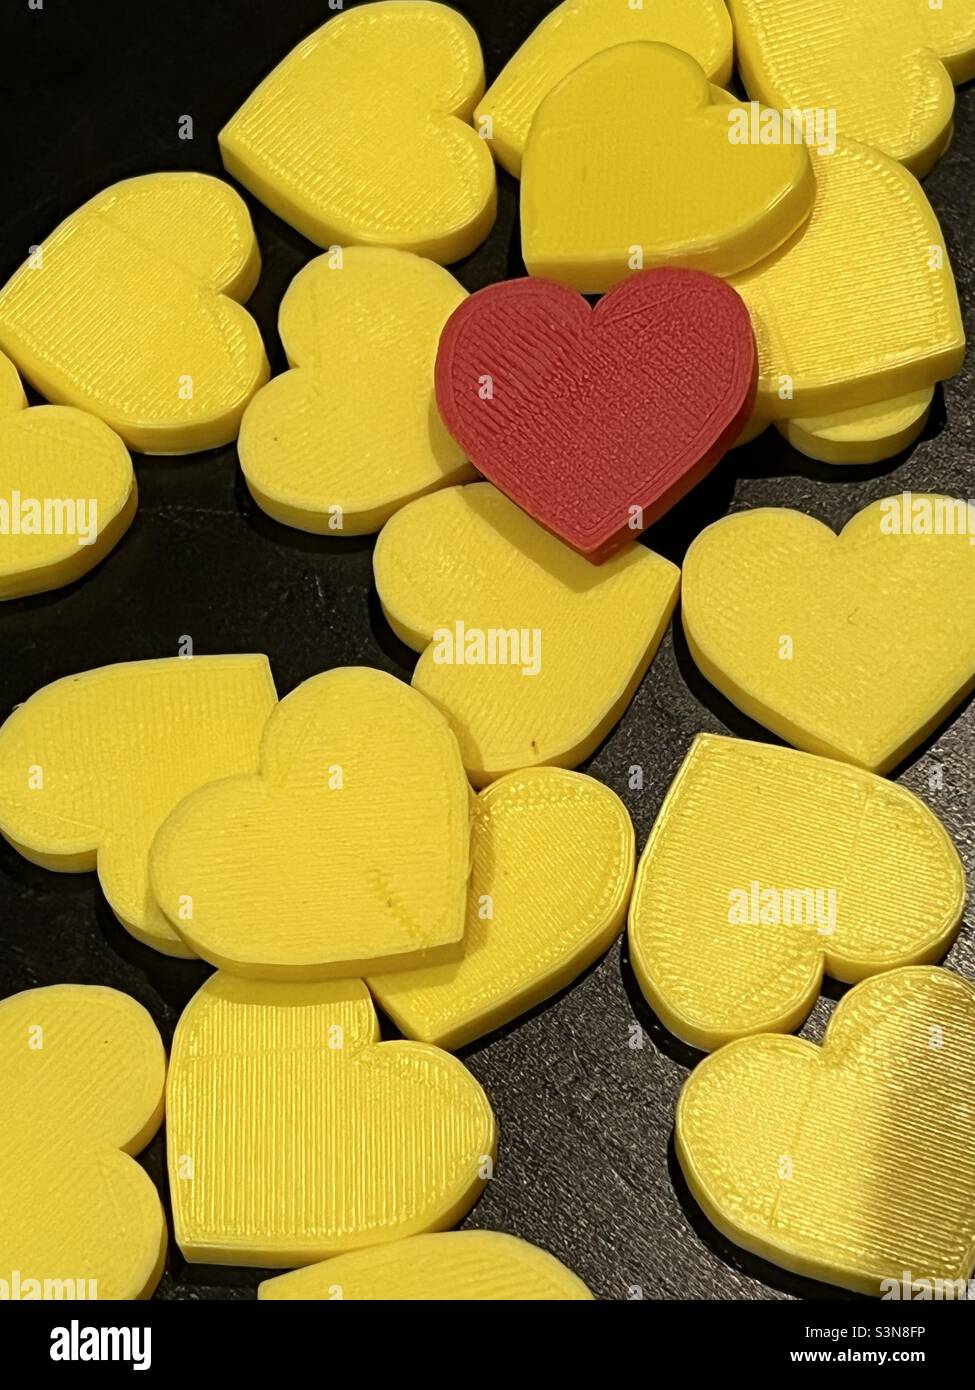 Stack of 3D printed valentine hearts Stock Photo